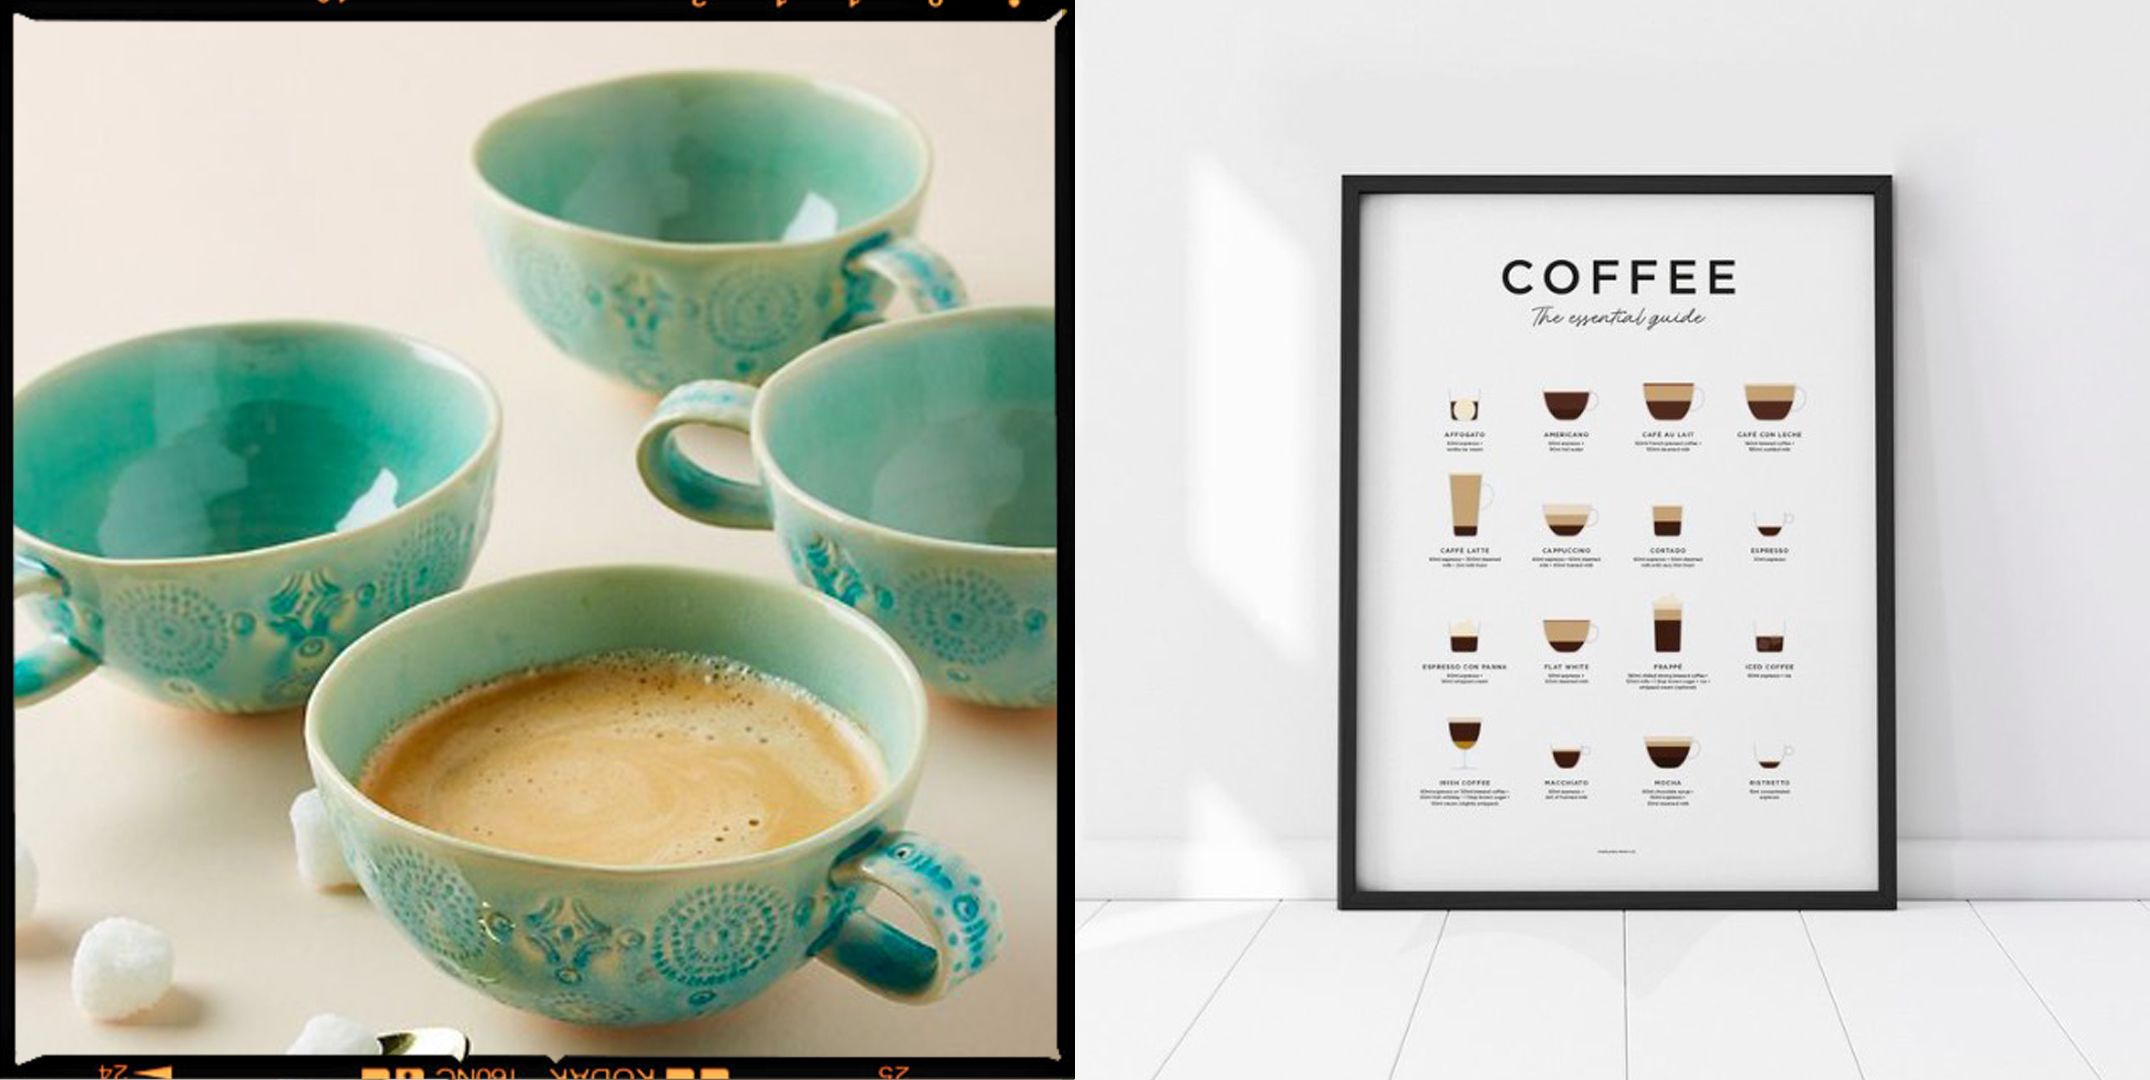 21 coffee themed gifts for Christmas 2022